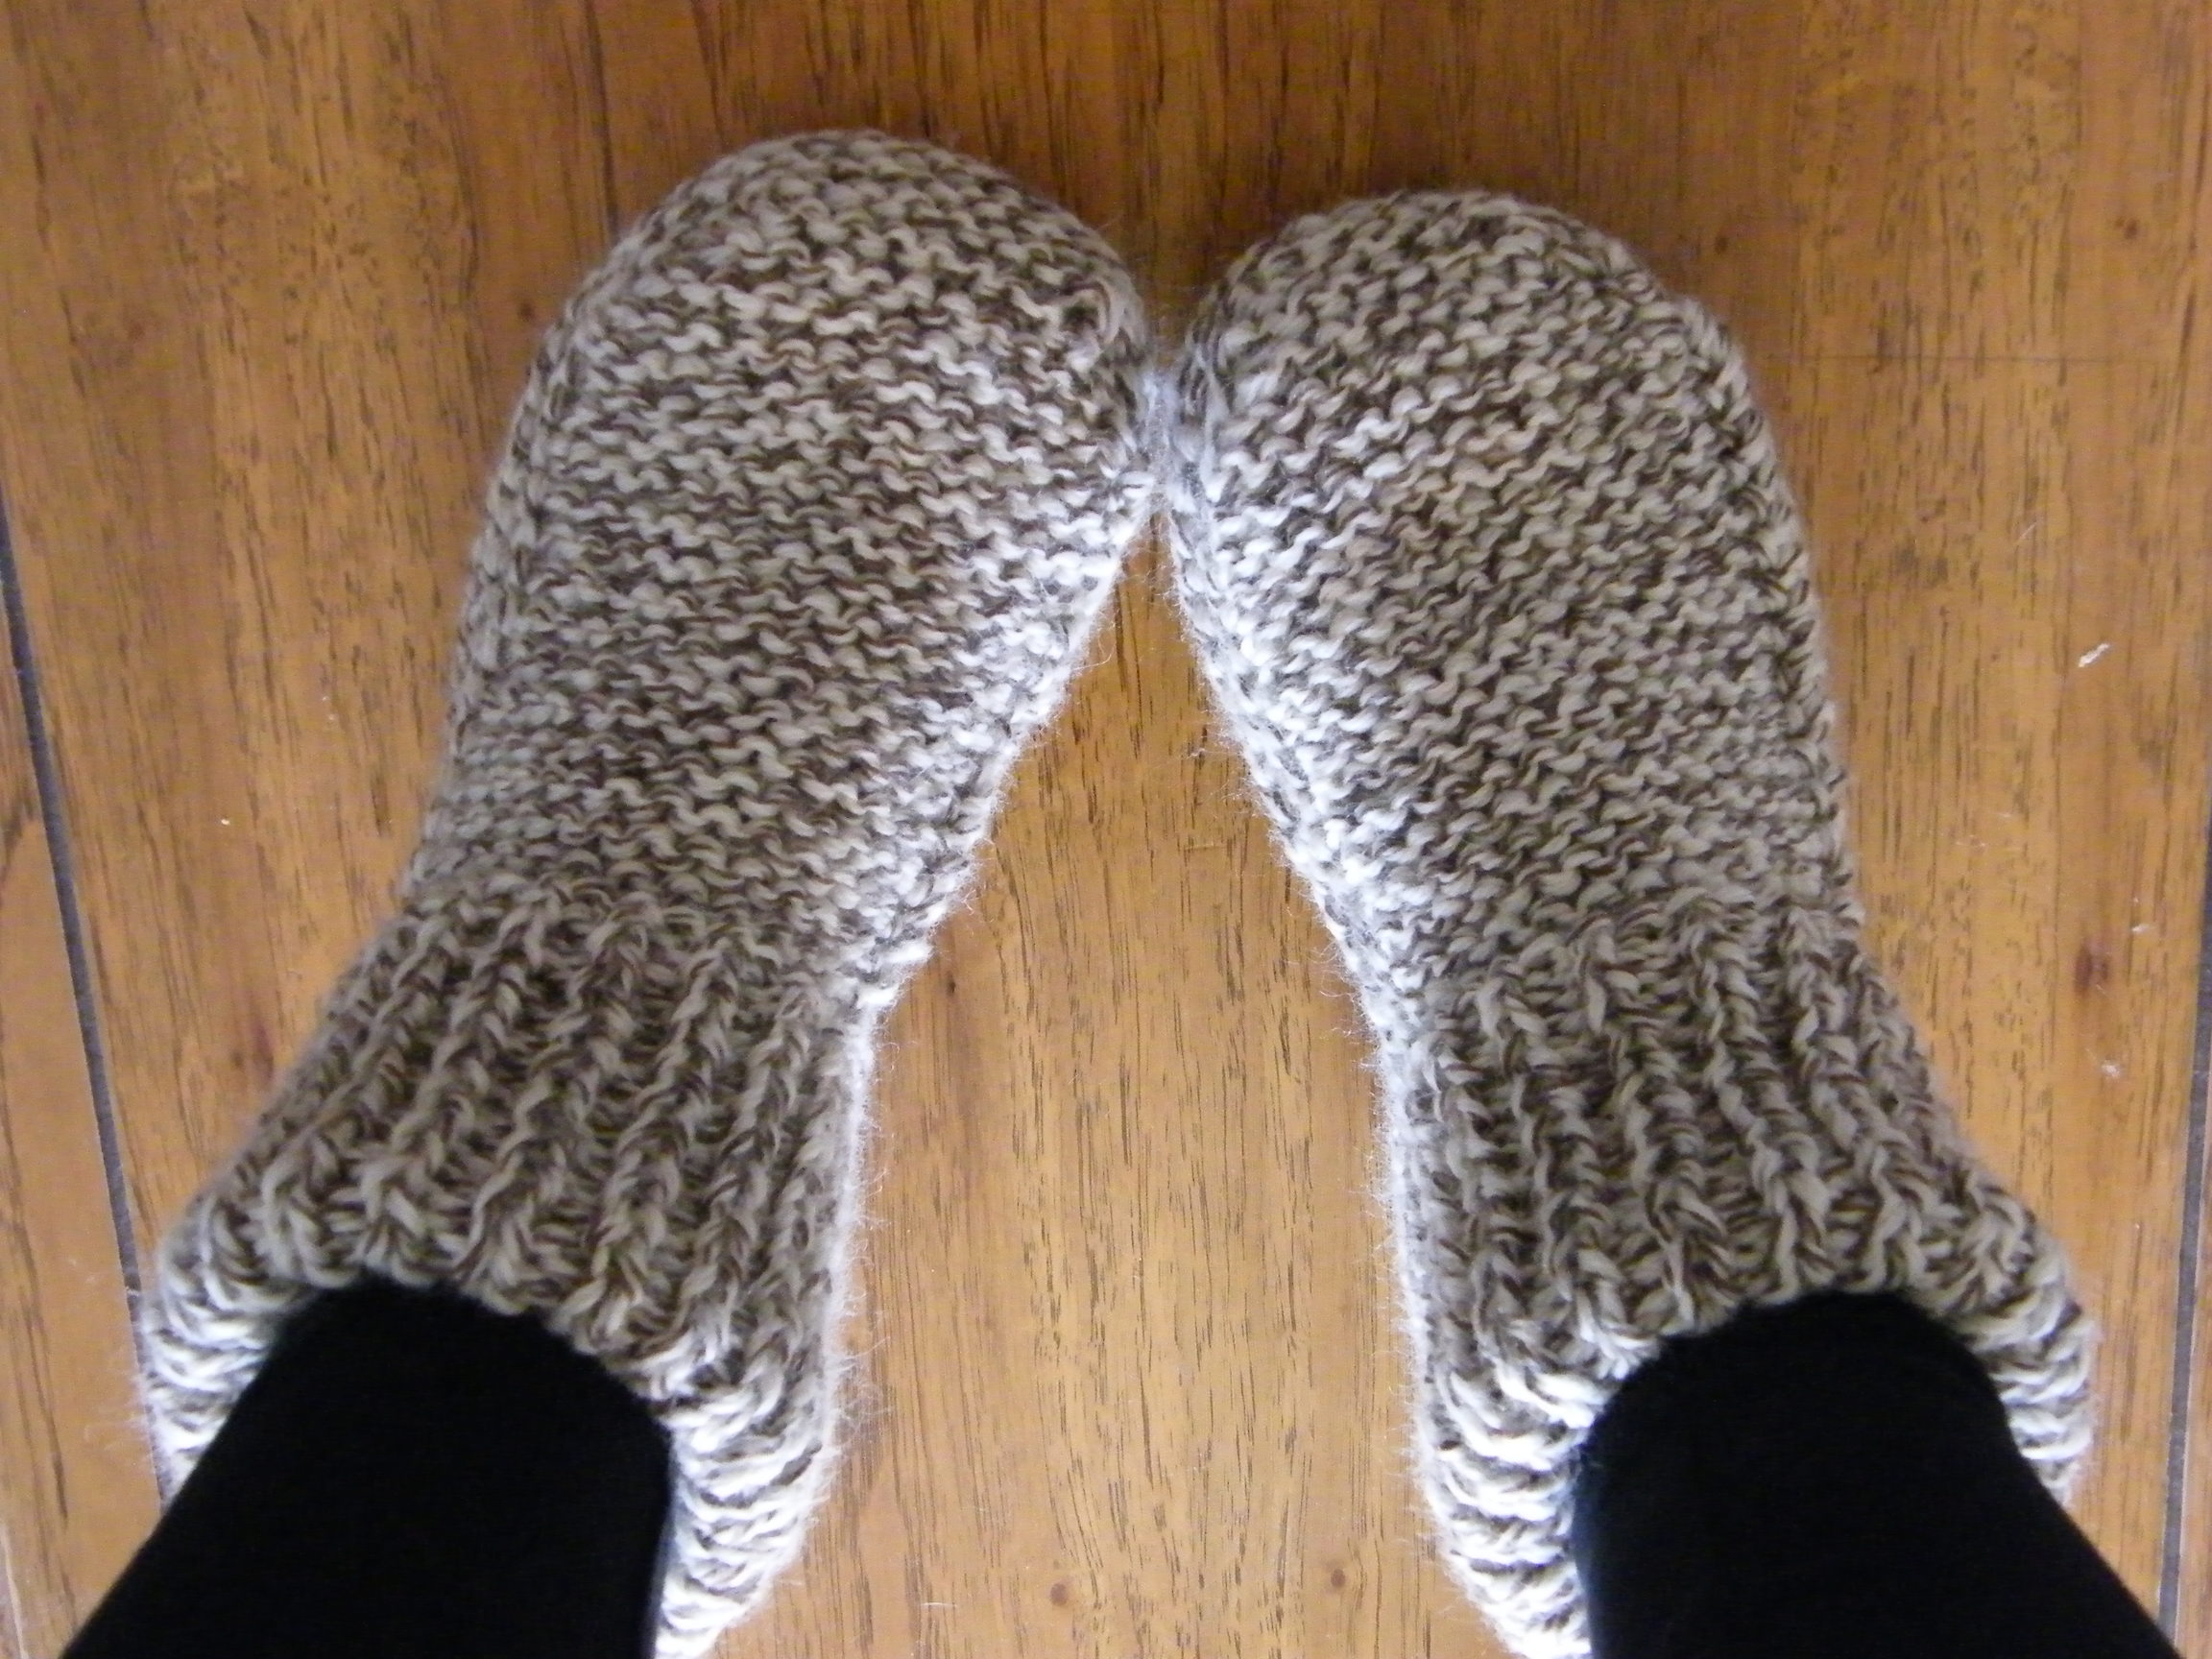 Knitted Slipper Patterns Knitting On The Moon We Had Gold Spoons